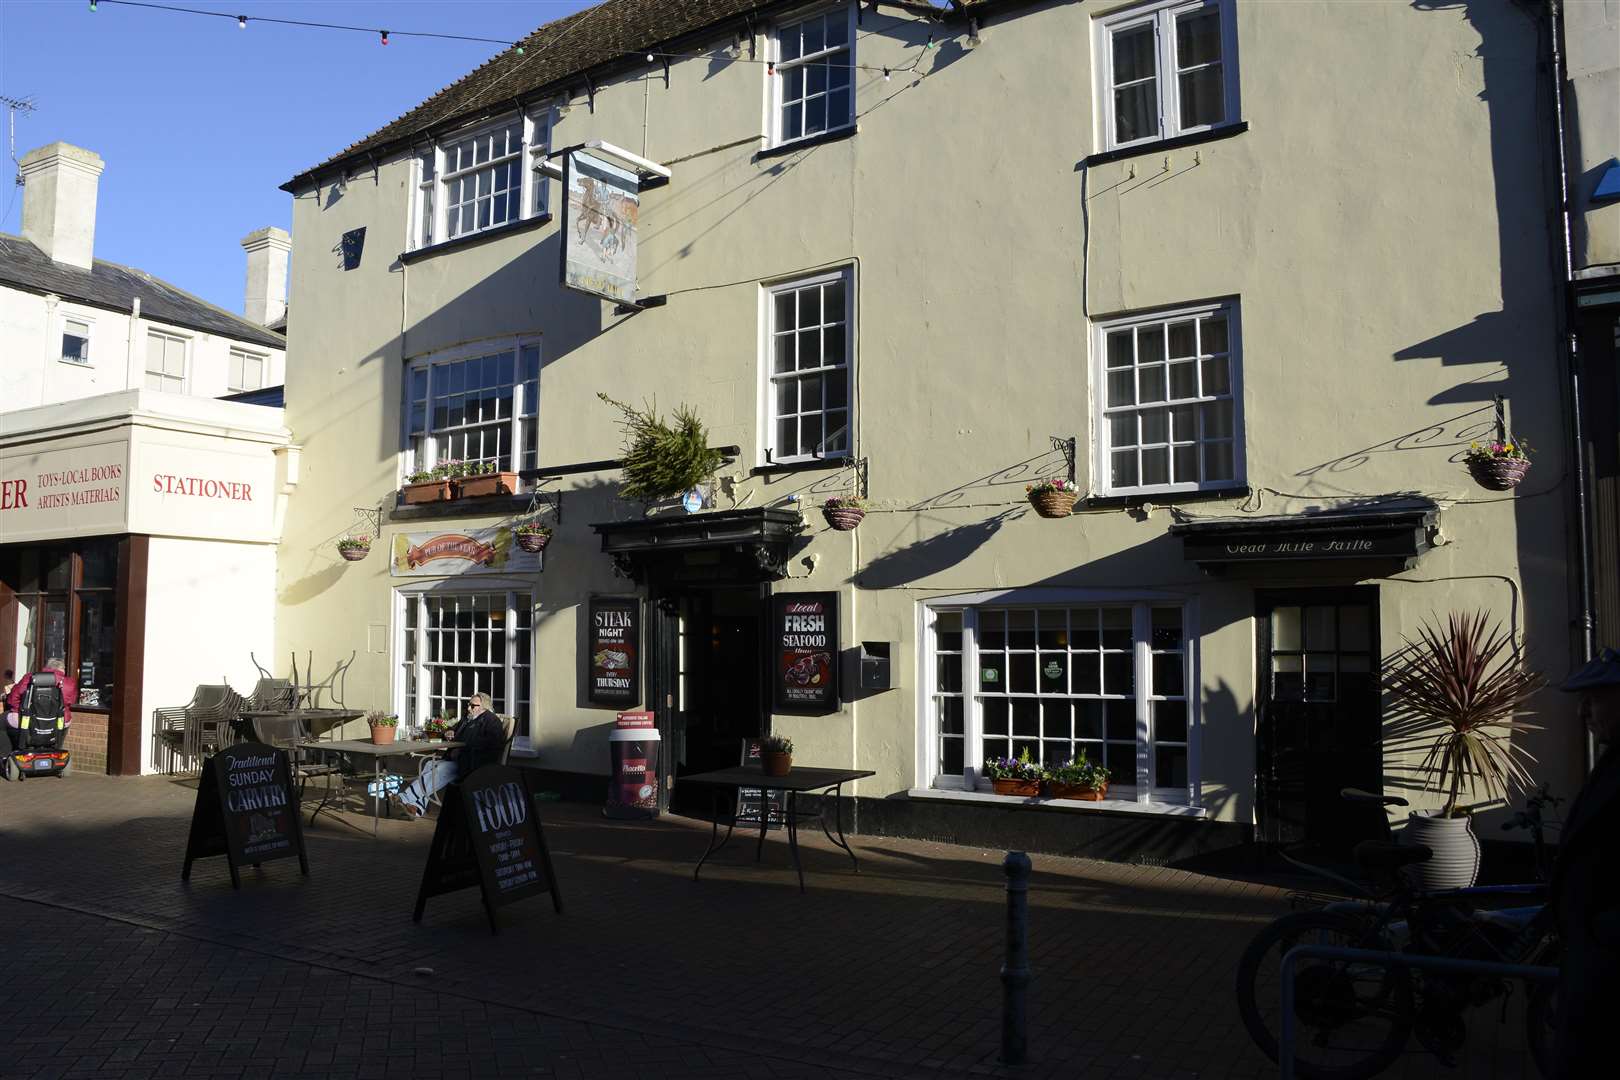 Health officials found cross-contamination of food at the New Inn in Deal